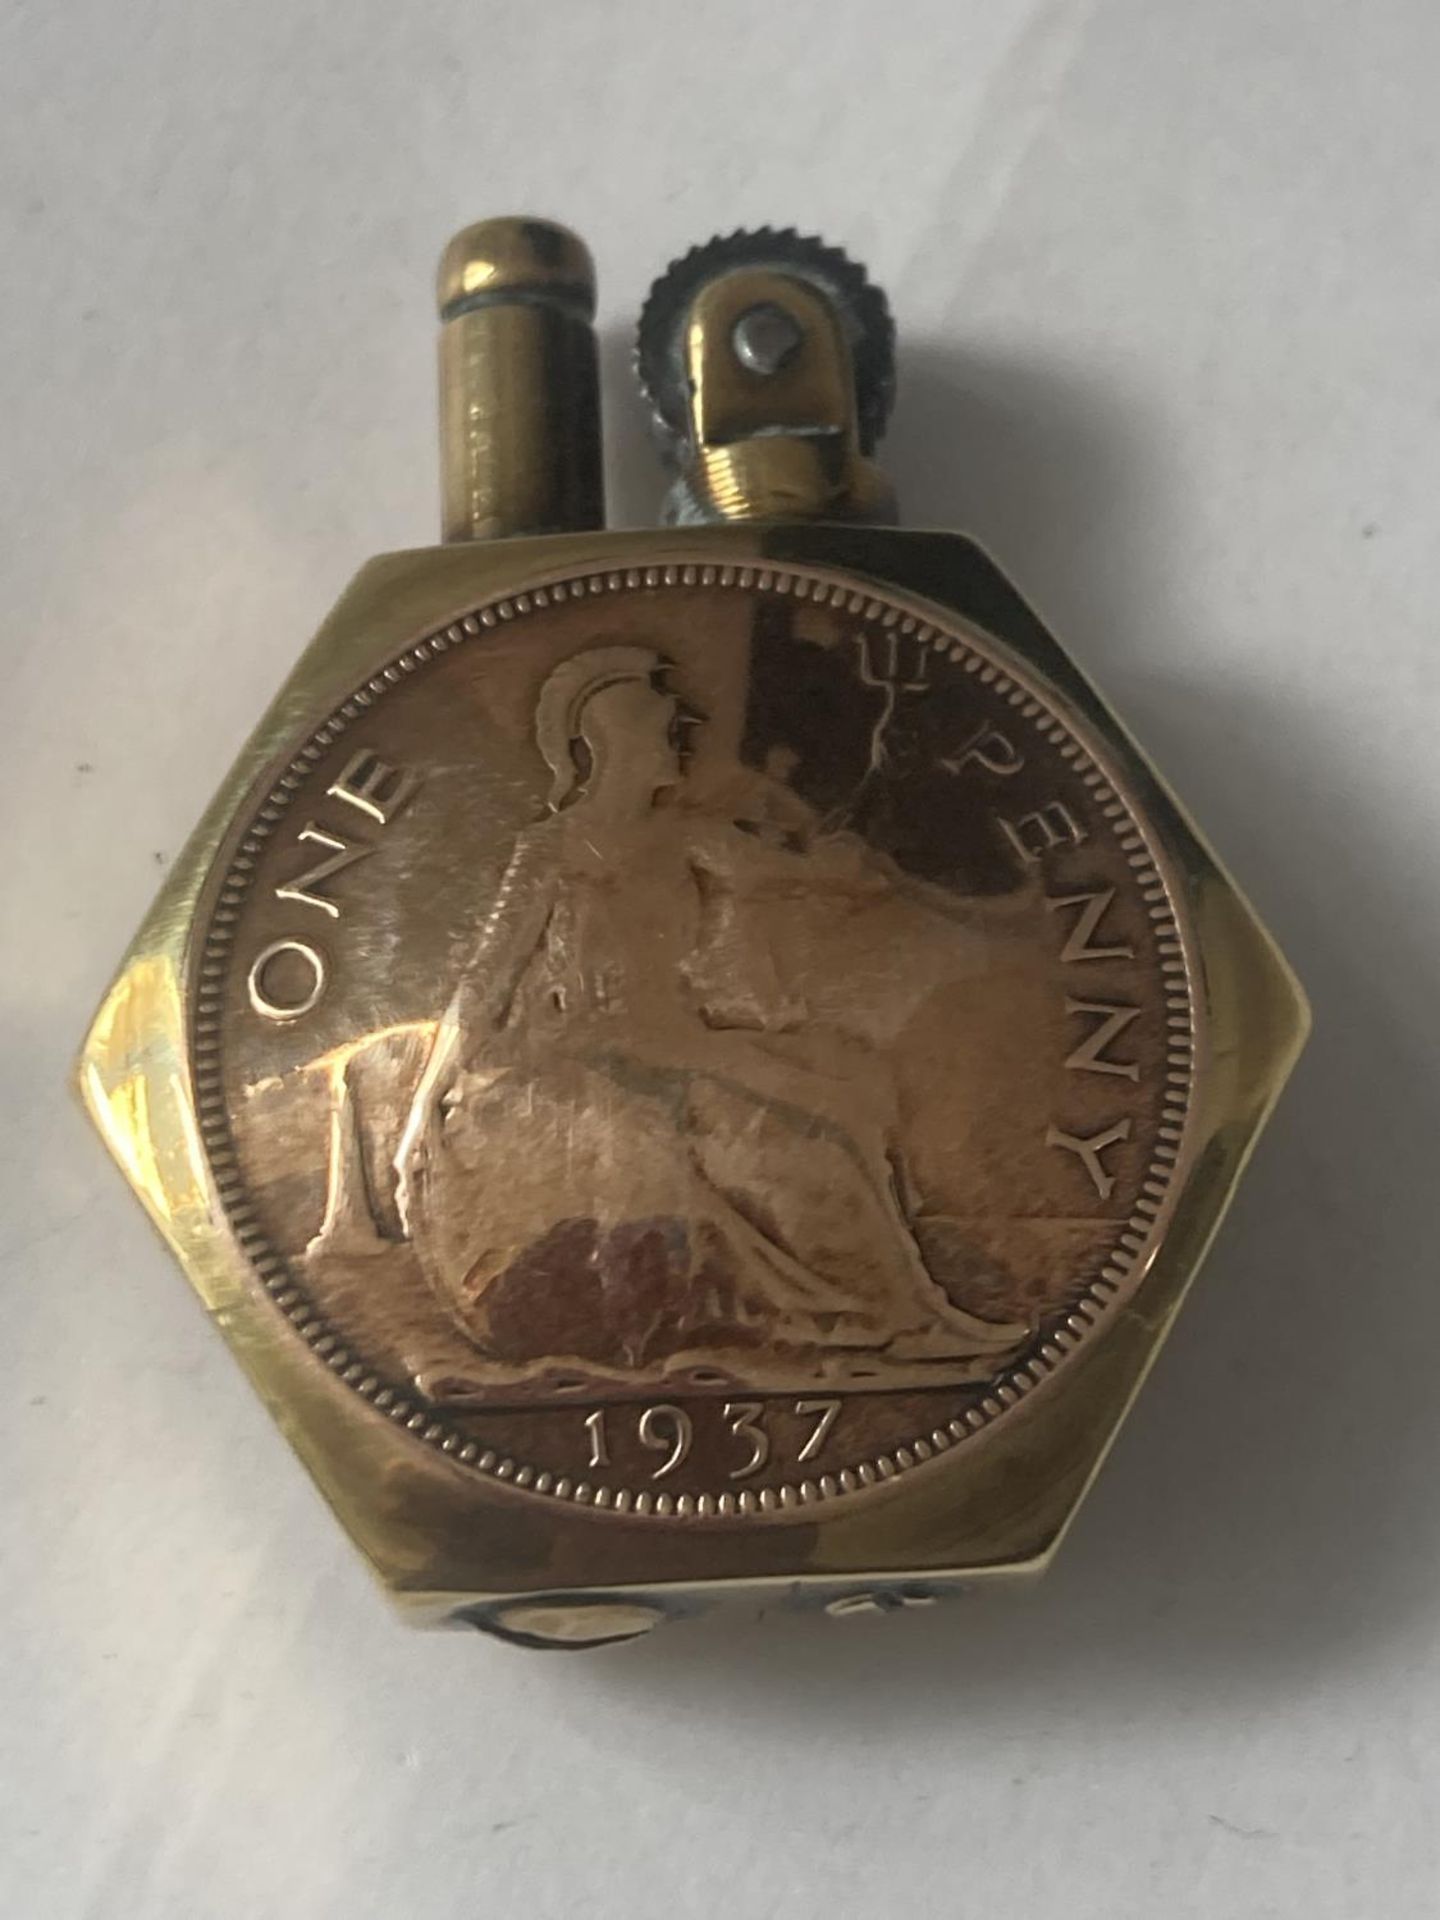 A 1937 ONE PENNY TRENCH ART LIGHTER - Image 4 of 4